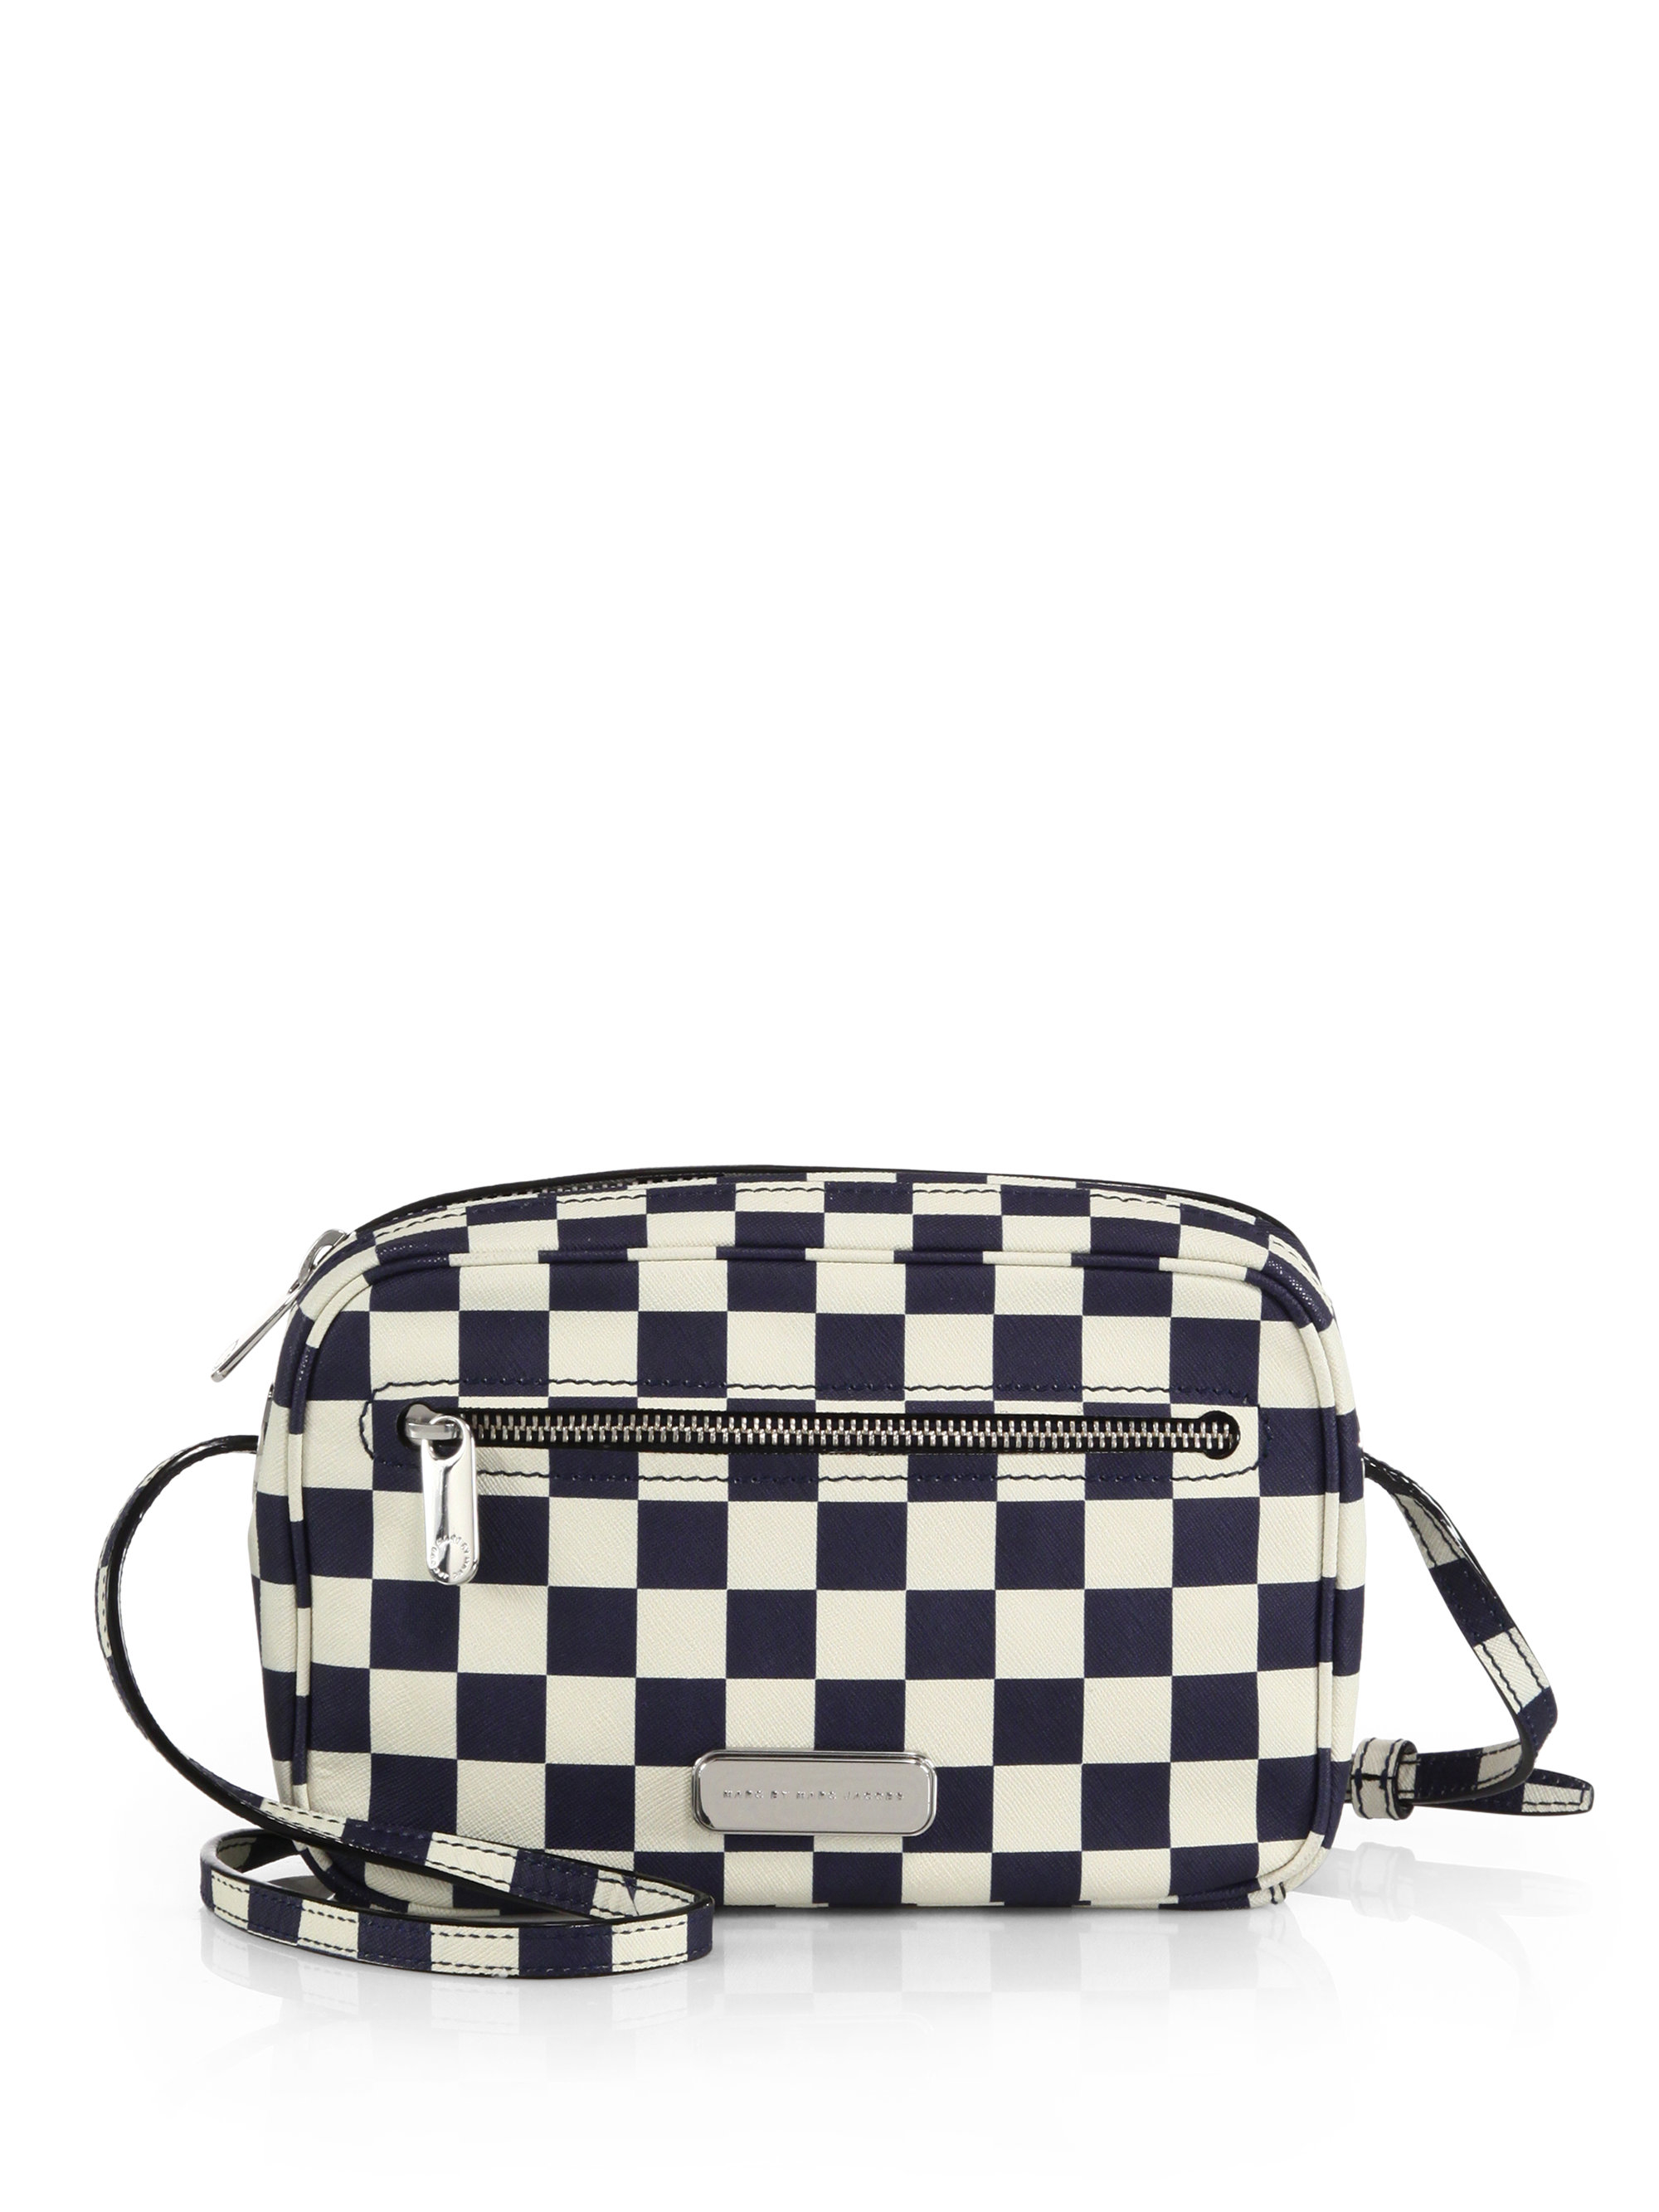 Marc By Marc Jacobs Sally Checkered Crossbody Bag in White